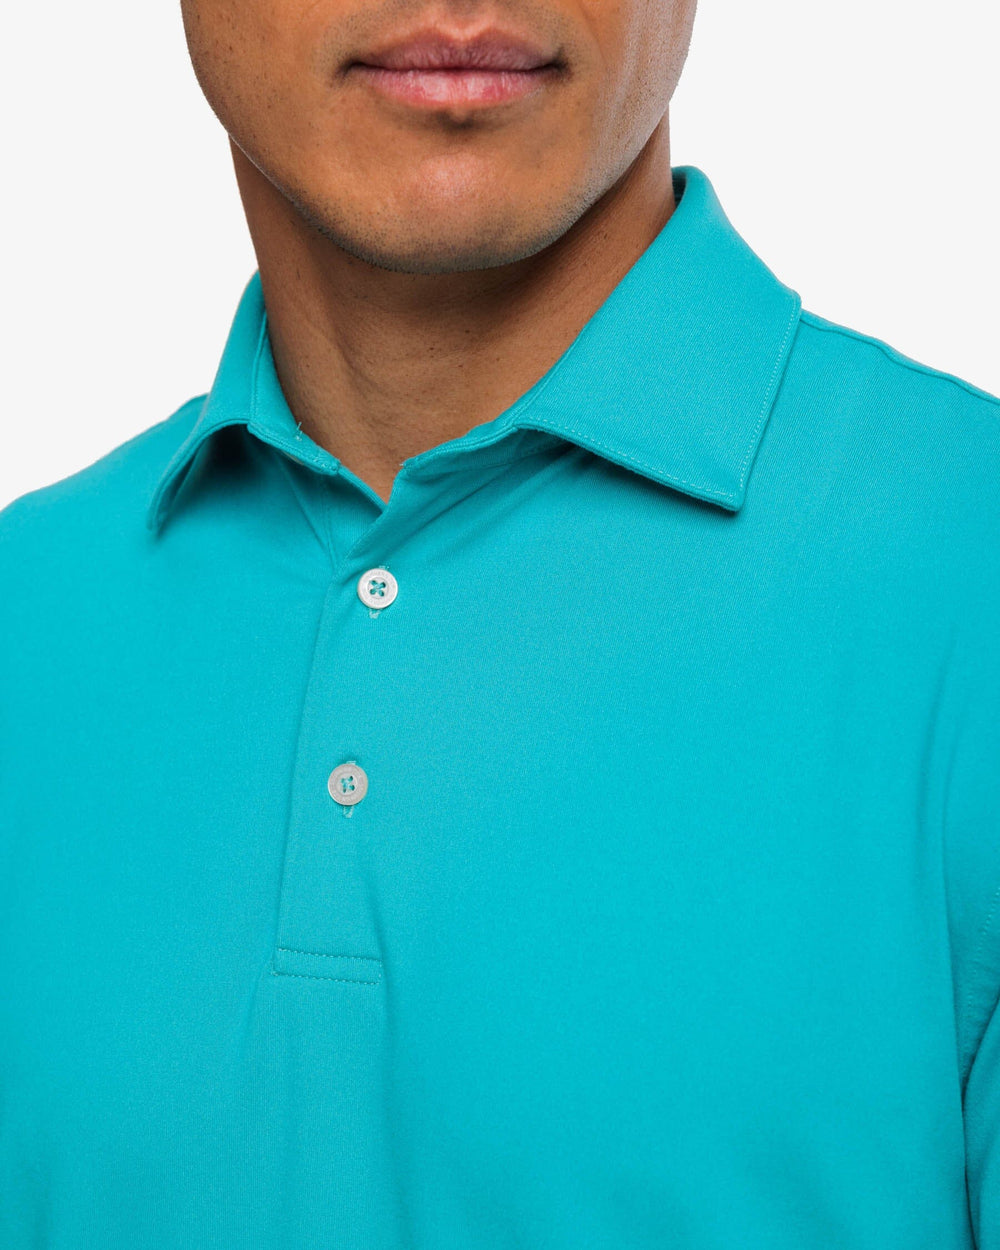 The detail view of the Southern Tide Ryder Lilly Polo Shirt by Southern Tide - Water Lilly Green